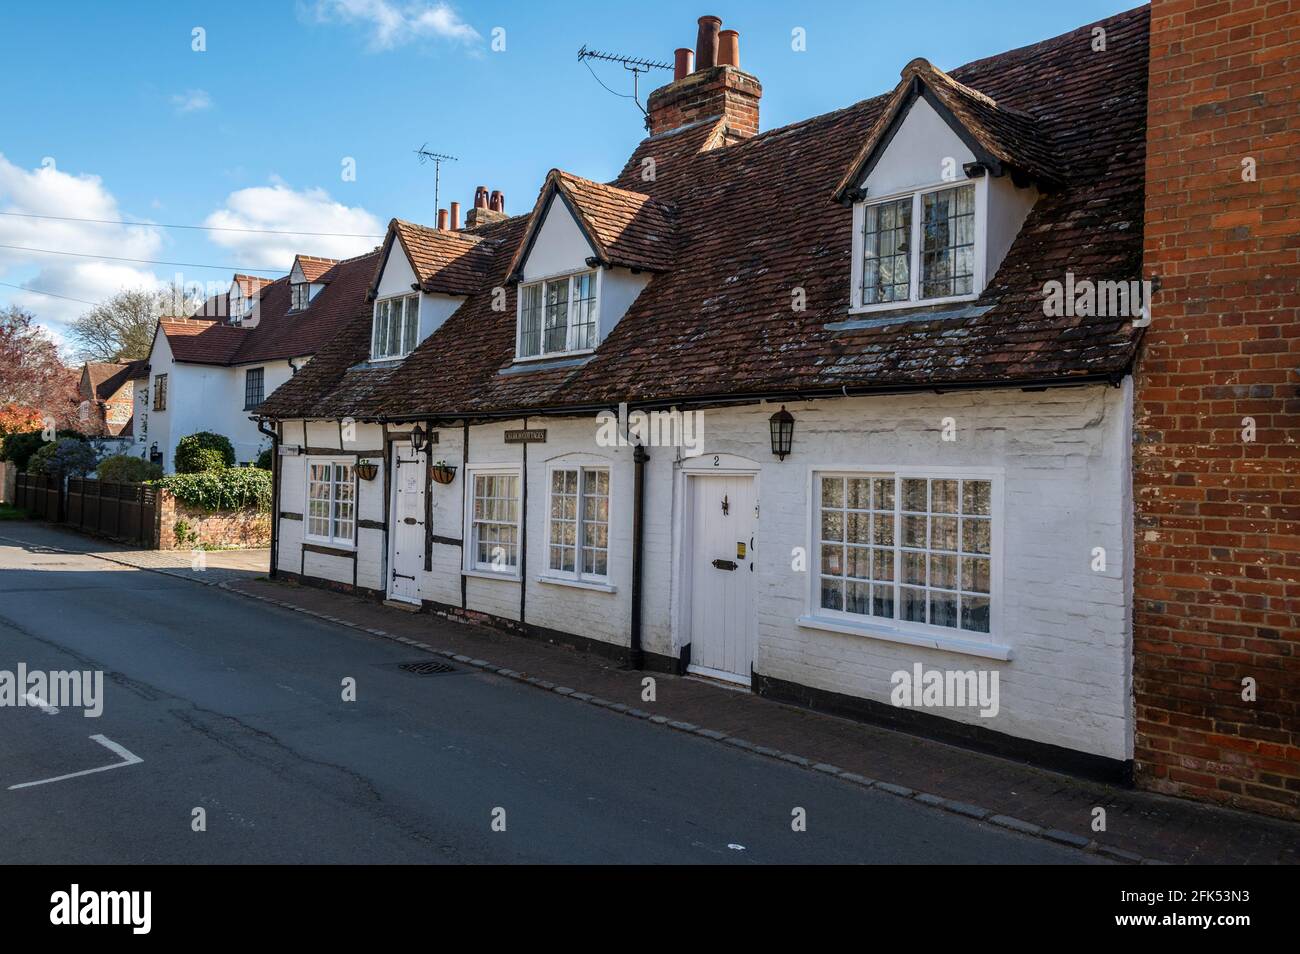 The village's former Post Office with bay windows is now private property.   It is one of the oldest buildings in Hurley village of Berkshire in Brita Stock Photo